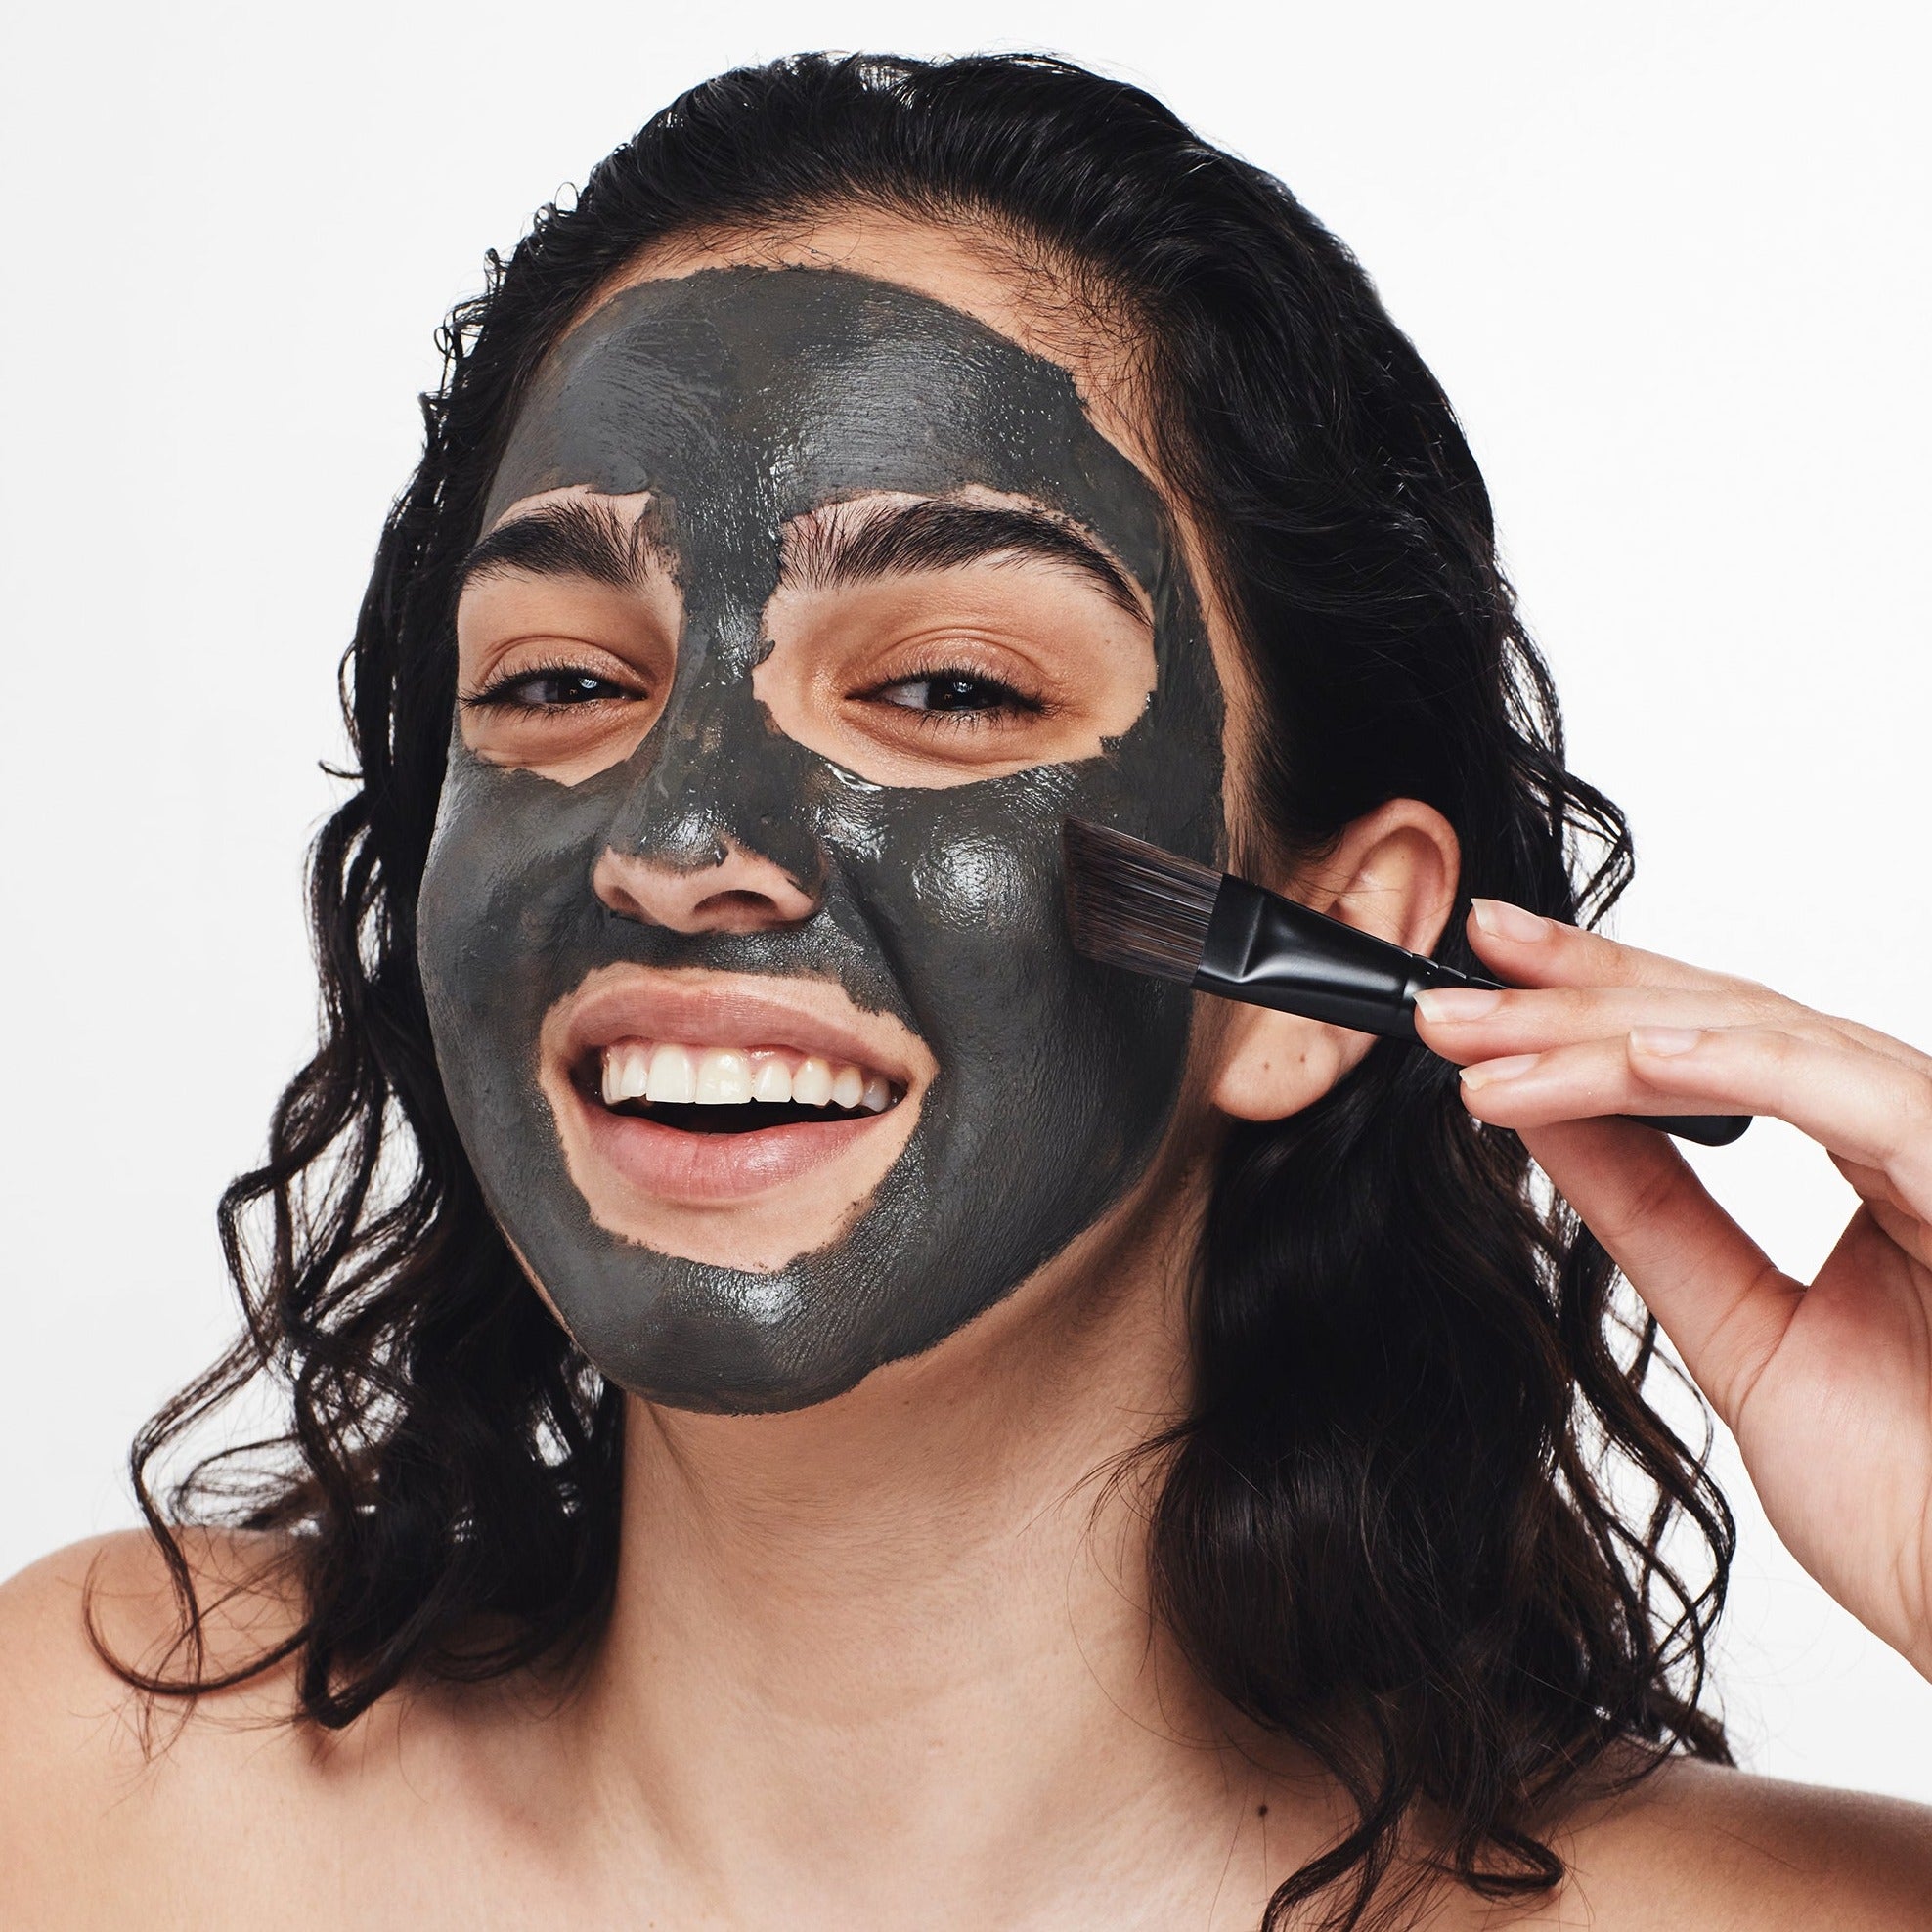 Pampering session: Woman indulging in a luxurious Dead Sea mud mask with The Dead Sea Co.'s precision brush.